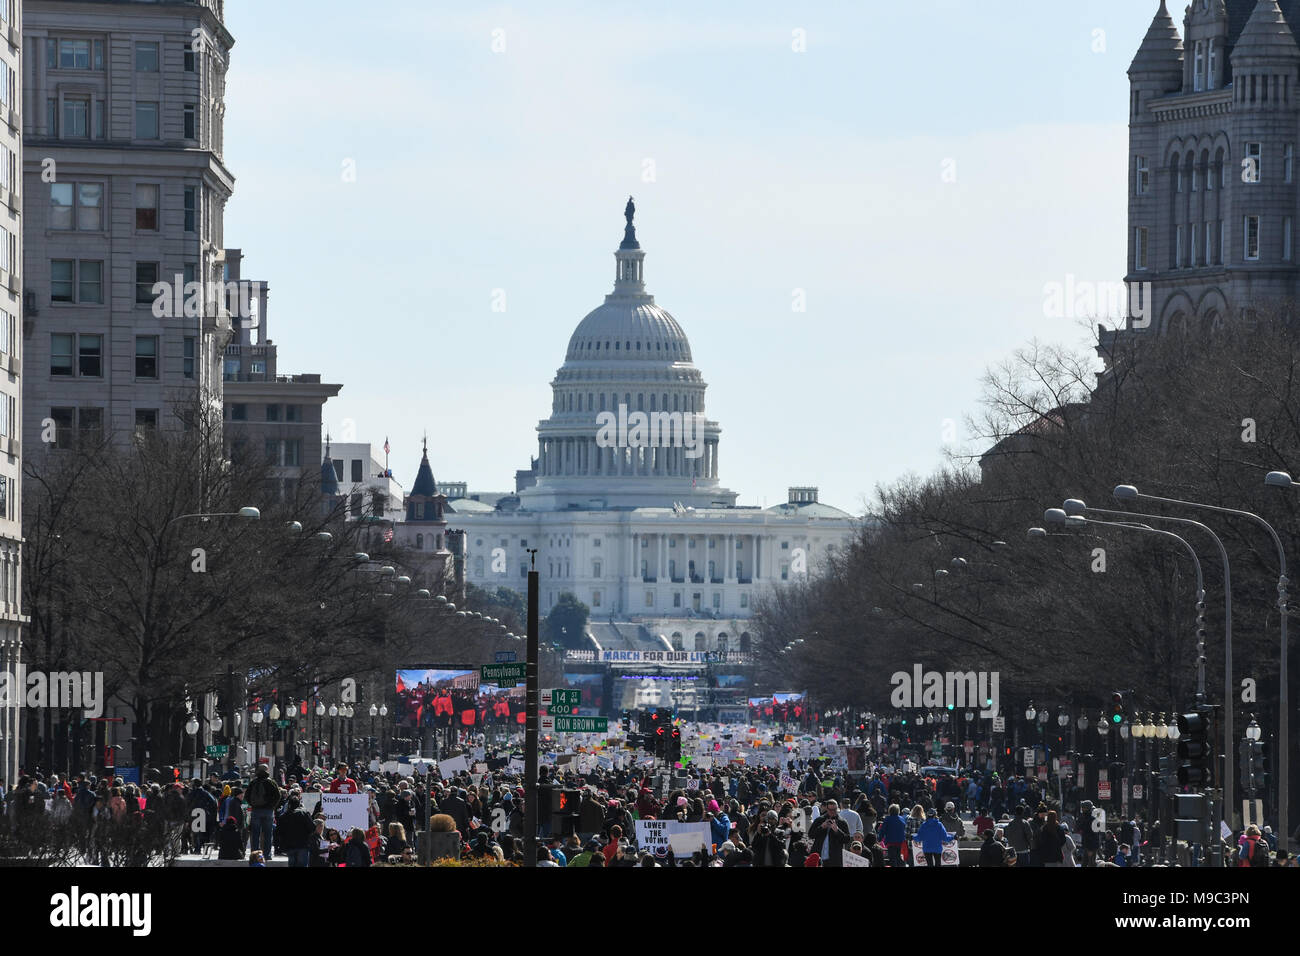 Washington, DC, USA. 24th Mar, 2018. Nearly 800,000 protesters march down Pennsylvania Avenue during the March for your Lives protest and march for gun control in the United States, held on Pennsylvania Avenue in Washington, DC. Credit: csm/Alamy Live News Stock Photo